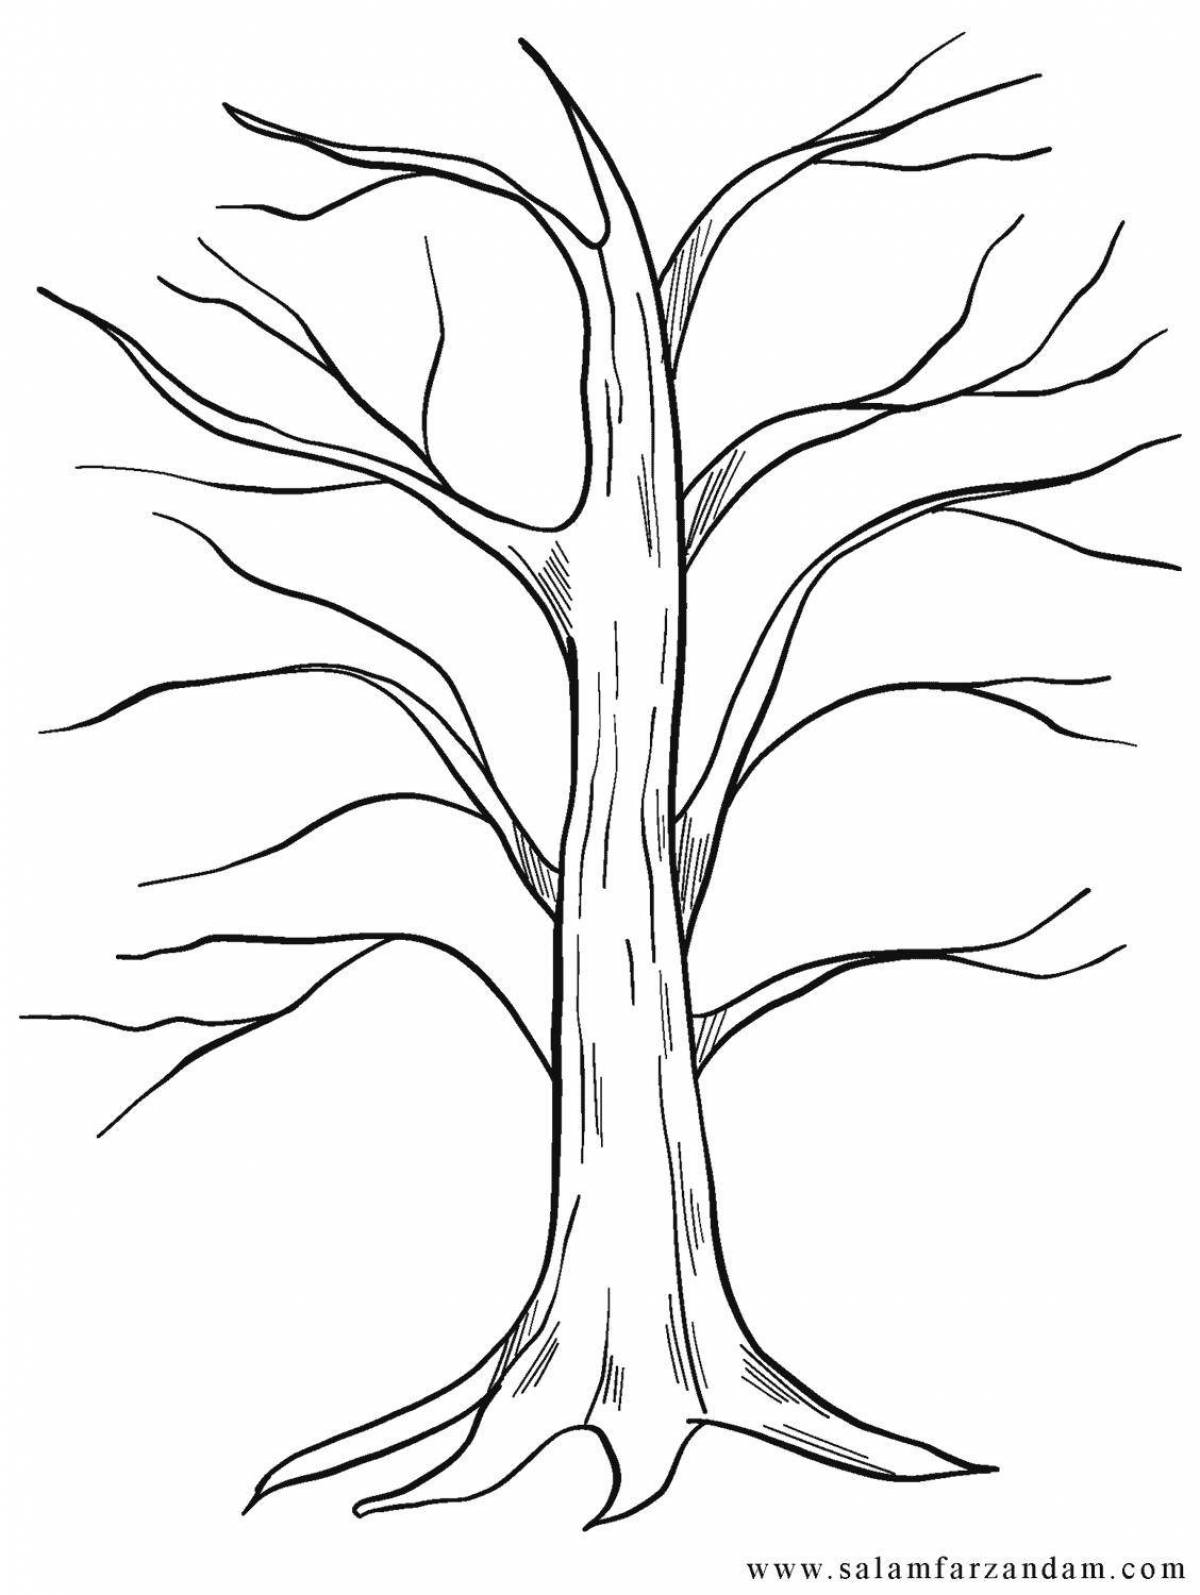 Coloring exotic branched tree